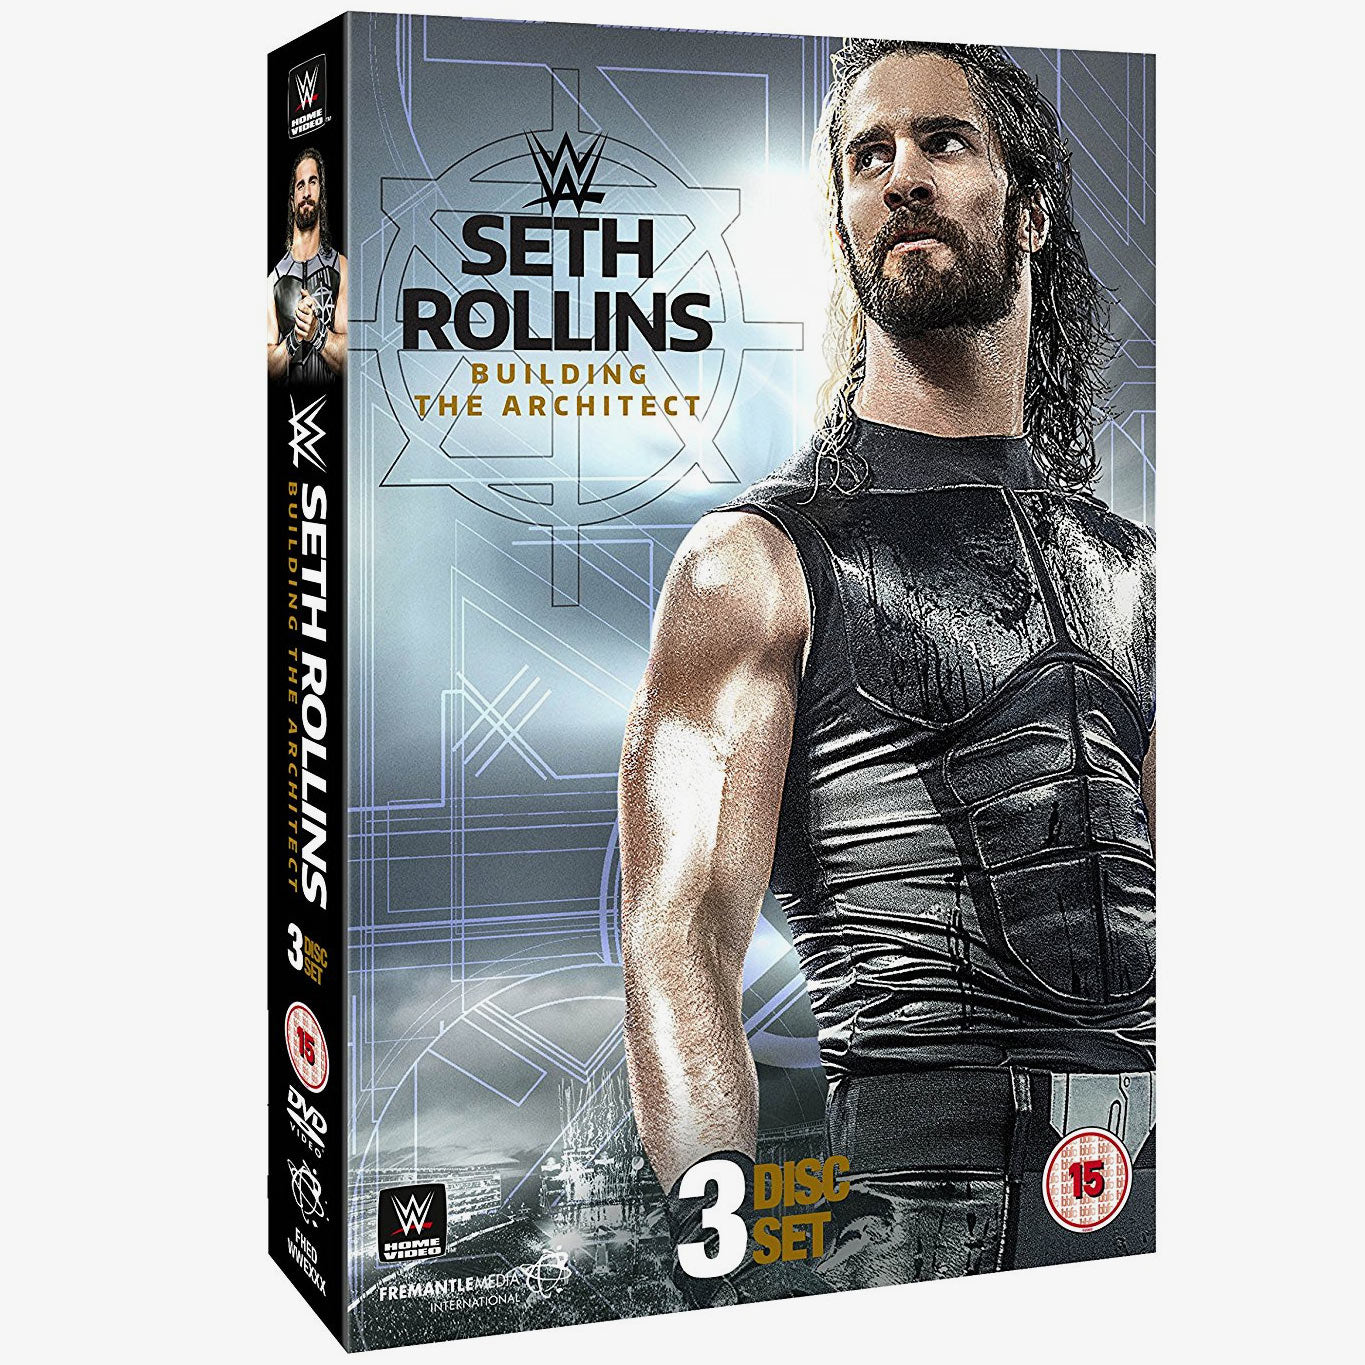 WWE Seth Rollins Building The Architect DVD